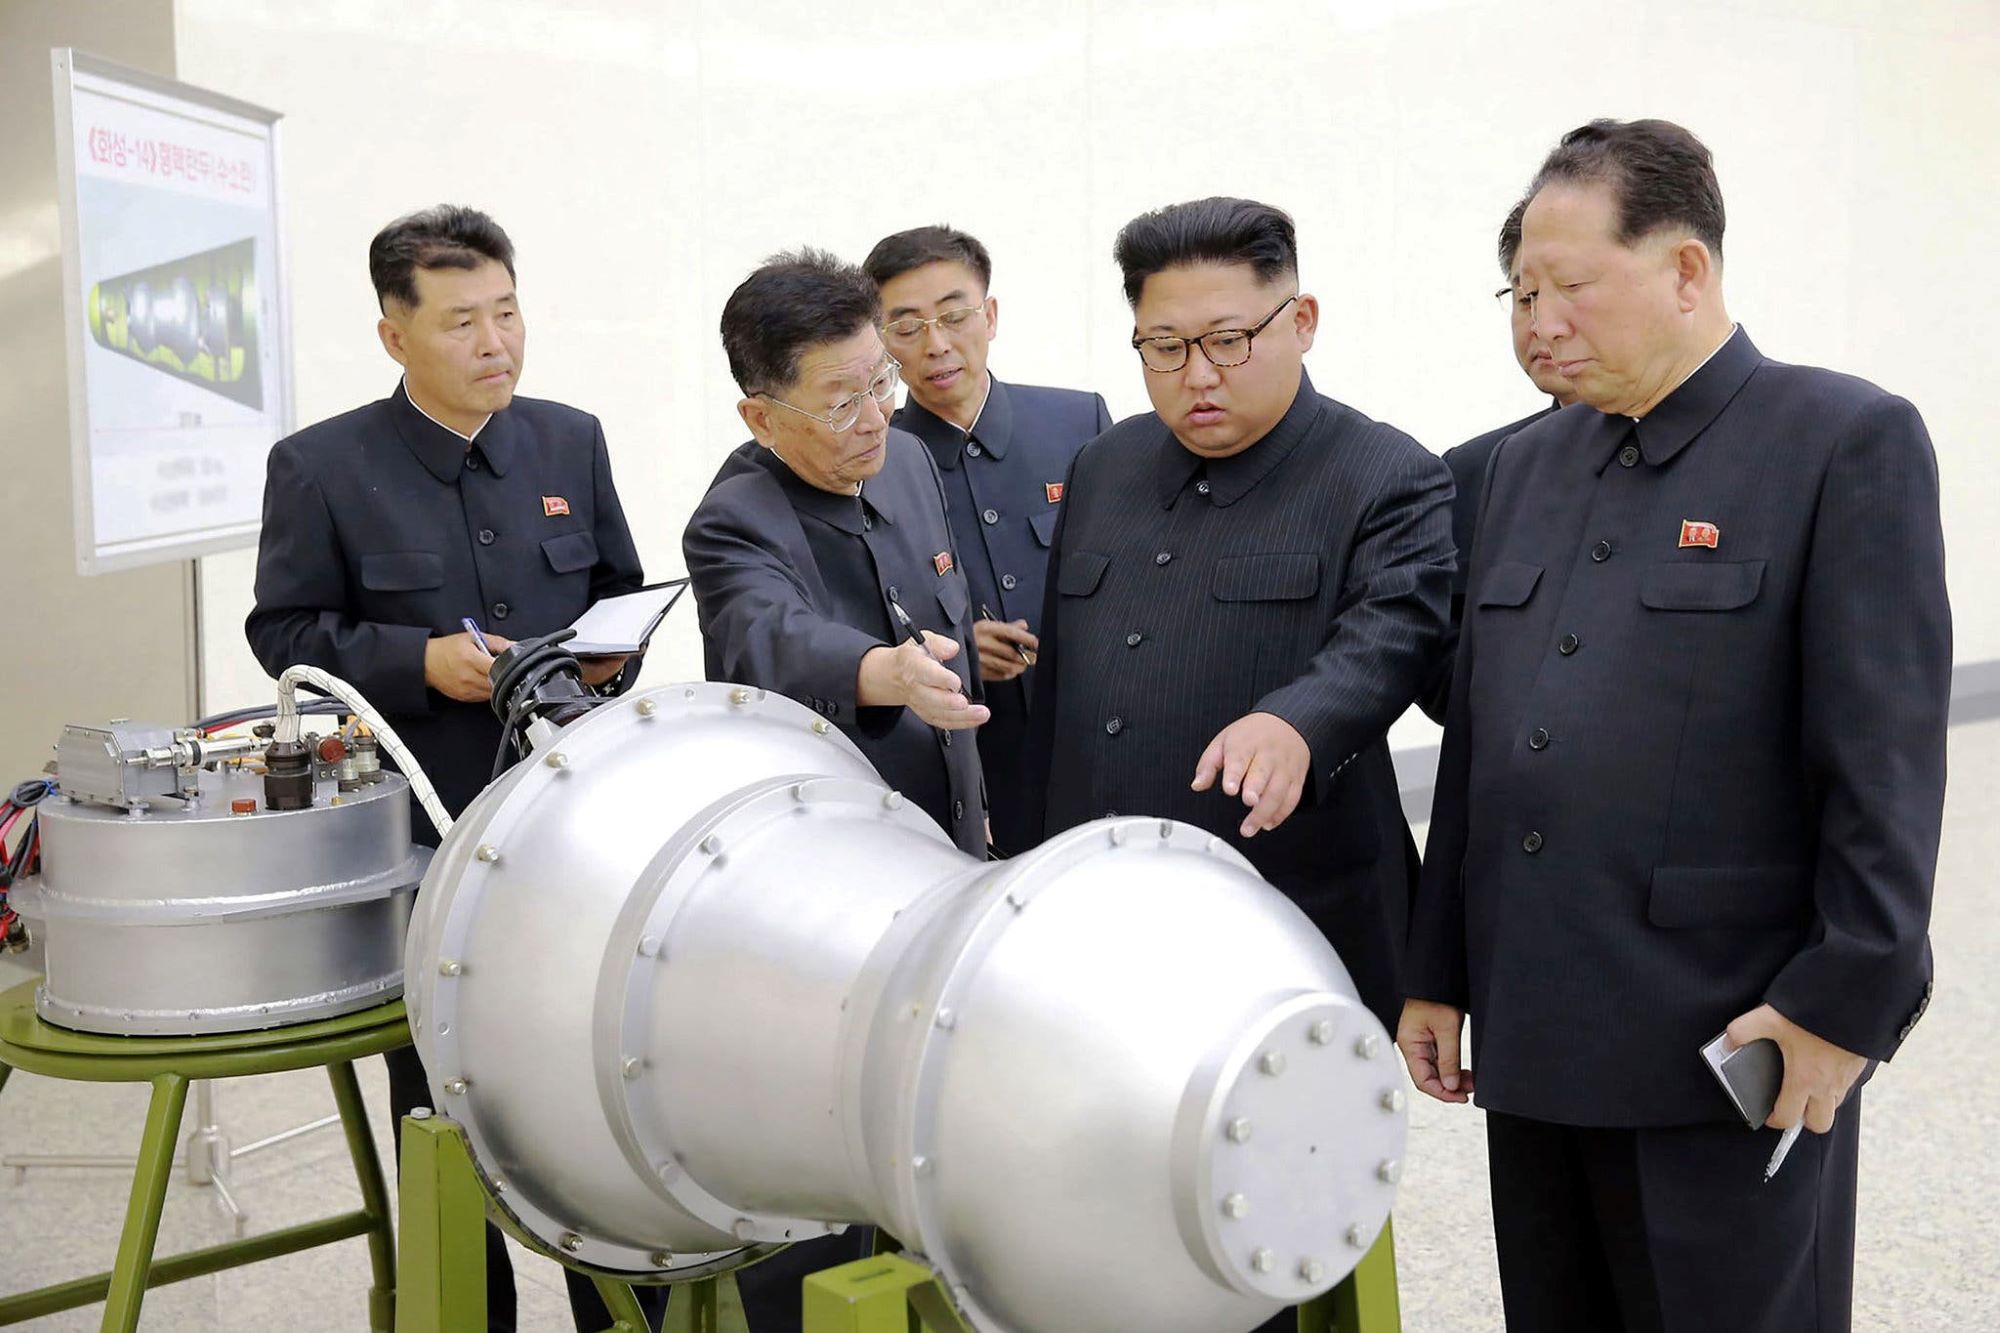 Photo of North Korean leader Kim Jong-un being shown a device claimed to be a thermonuclear weapon small enough to fit into an ICBM. Photo: Korean Central News Agency, September 3rd 2017.